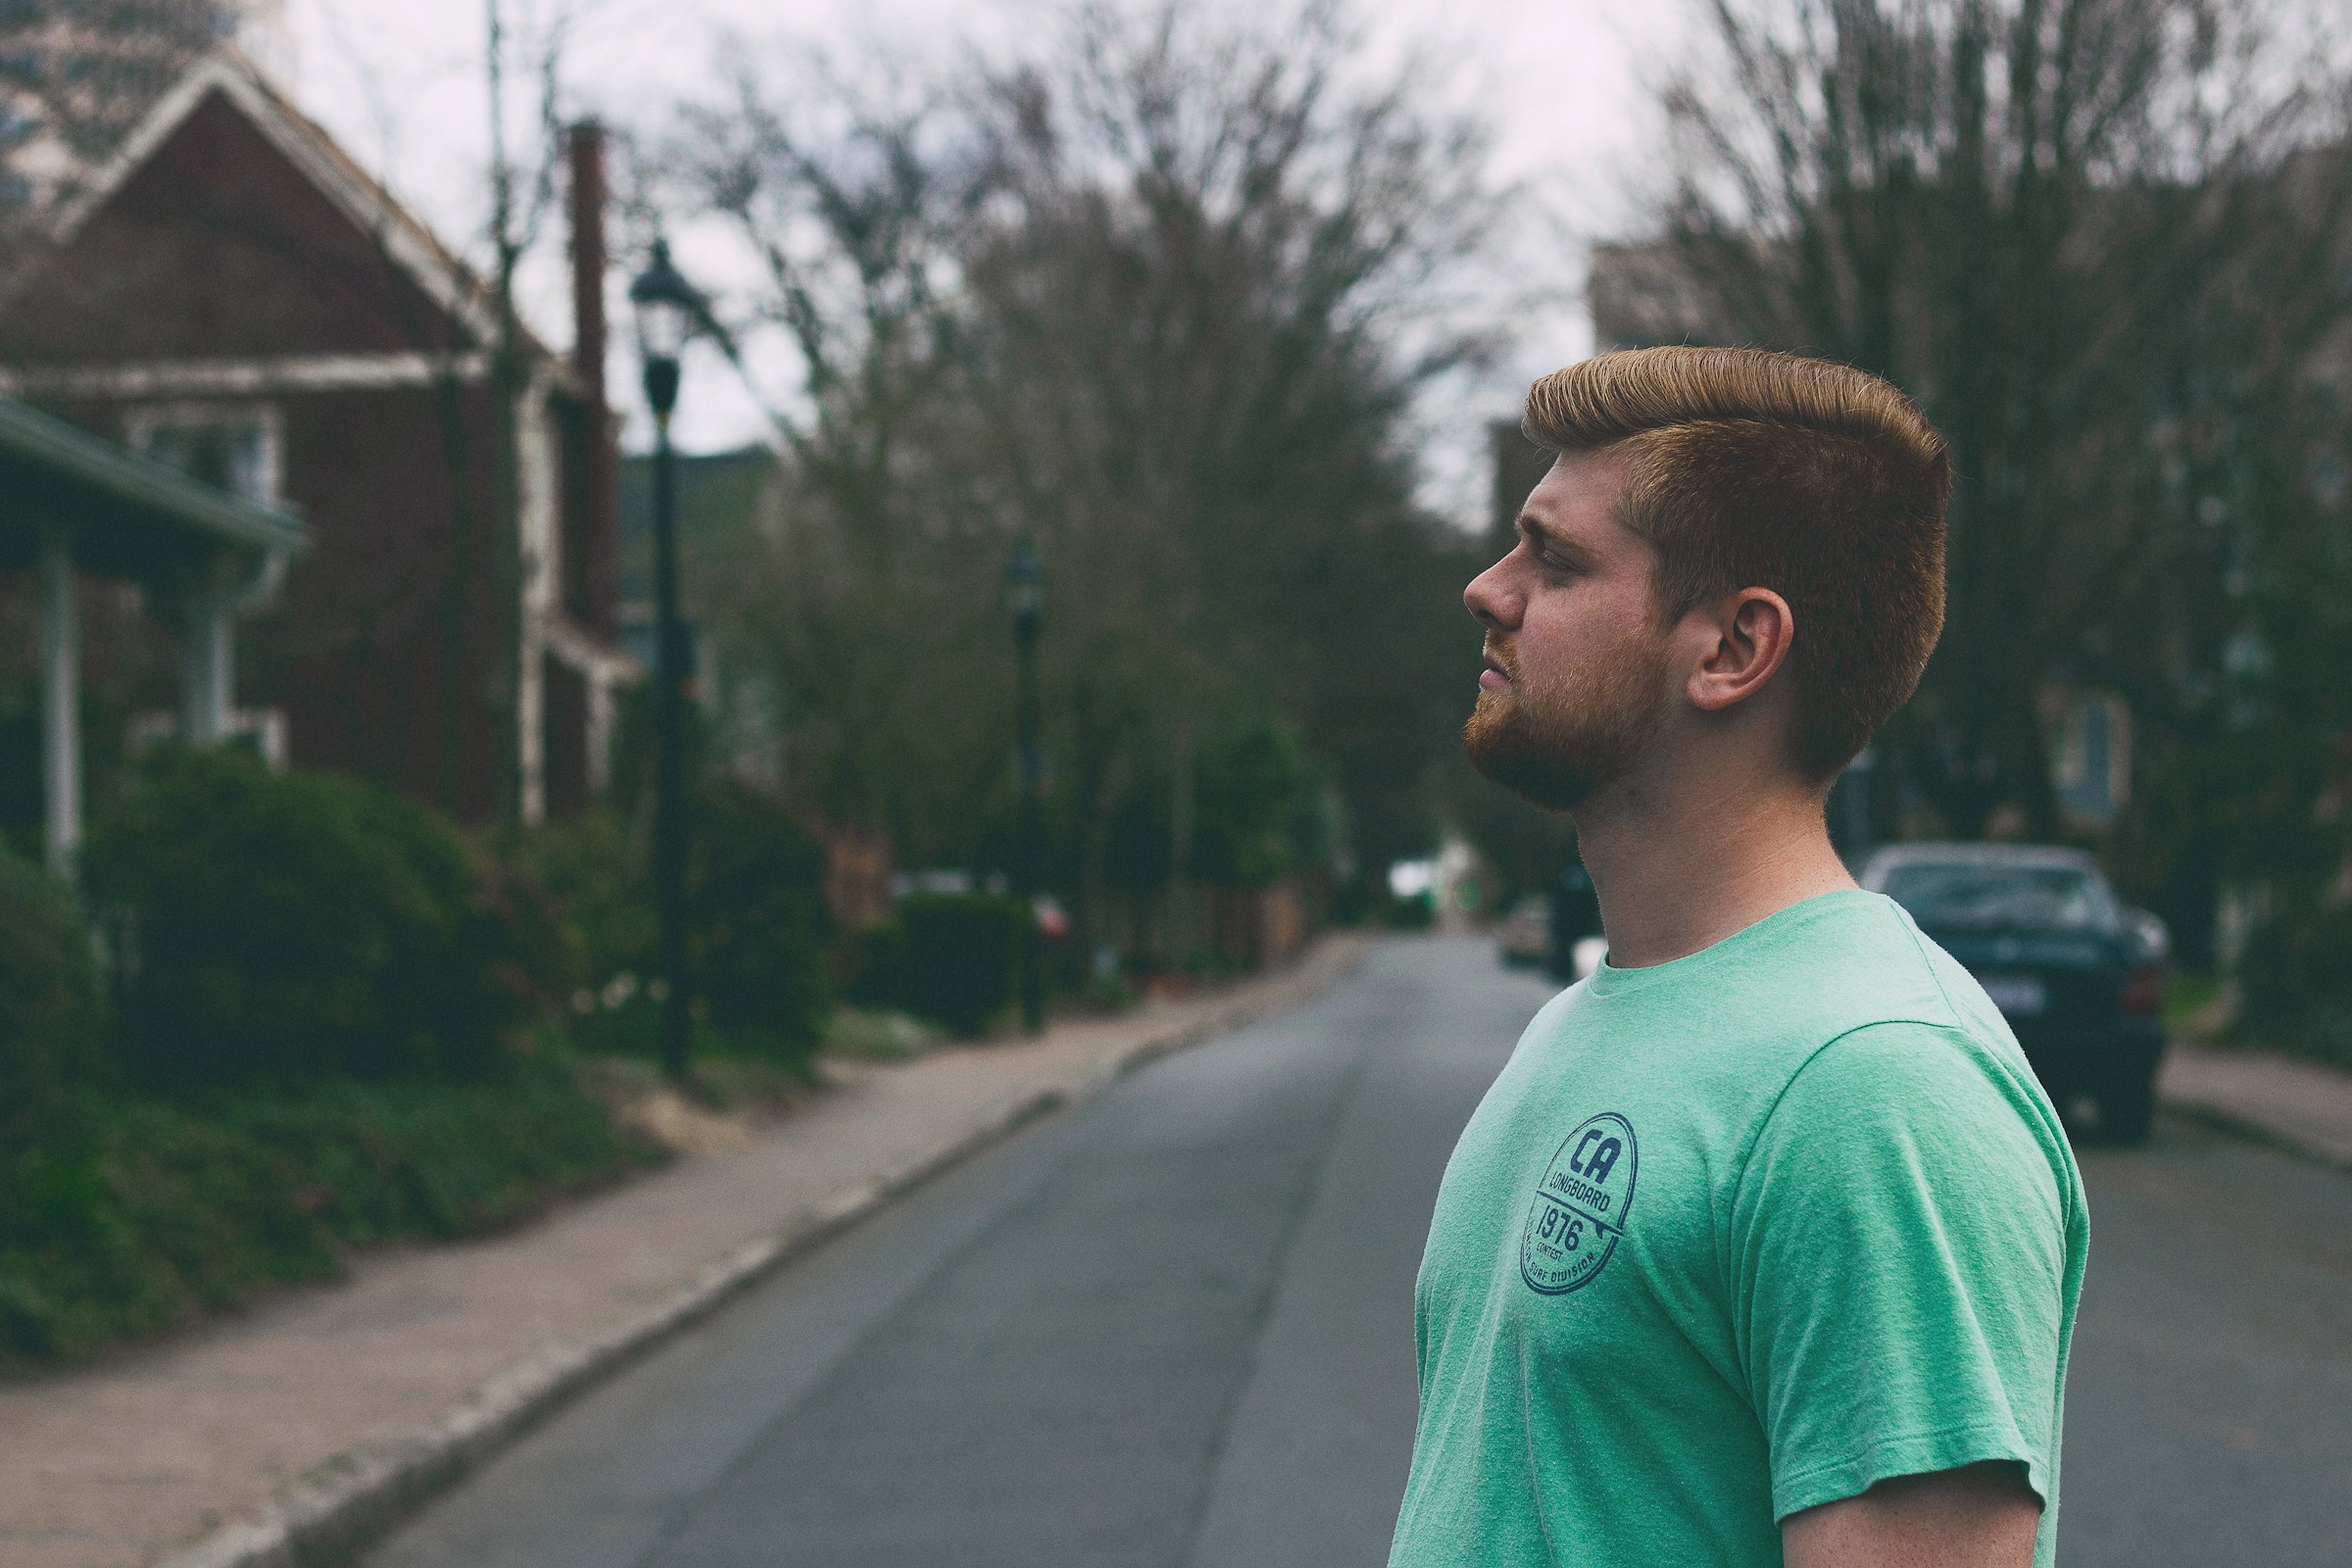 A man in a green t-shirt outside a house during daytime | Source: Unsplash